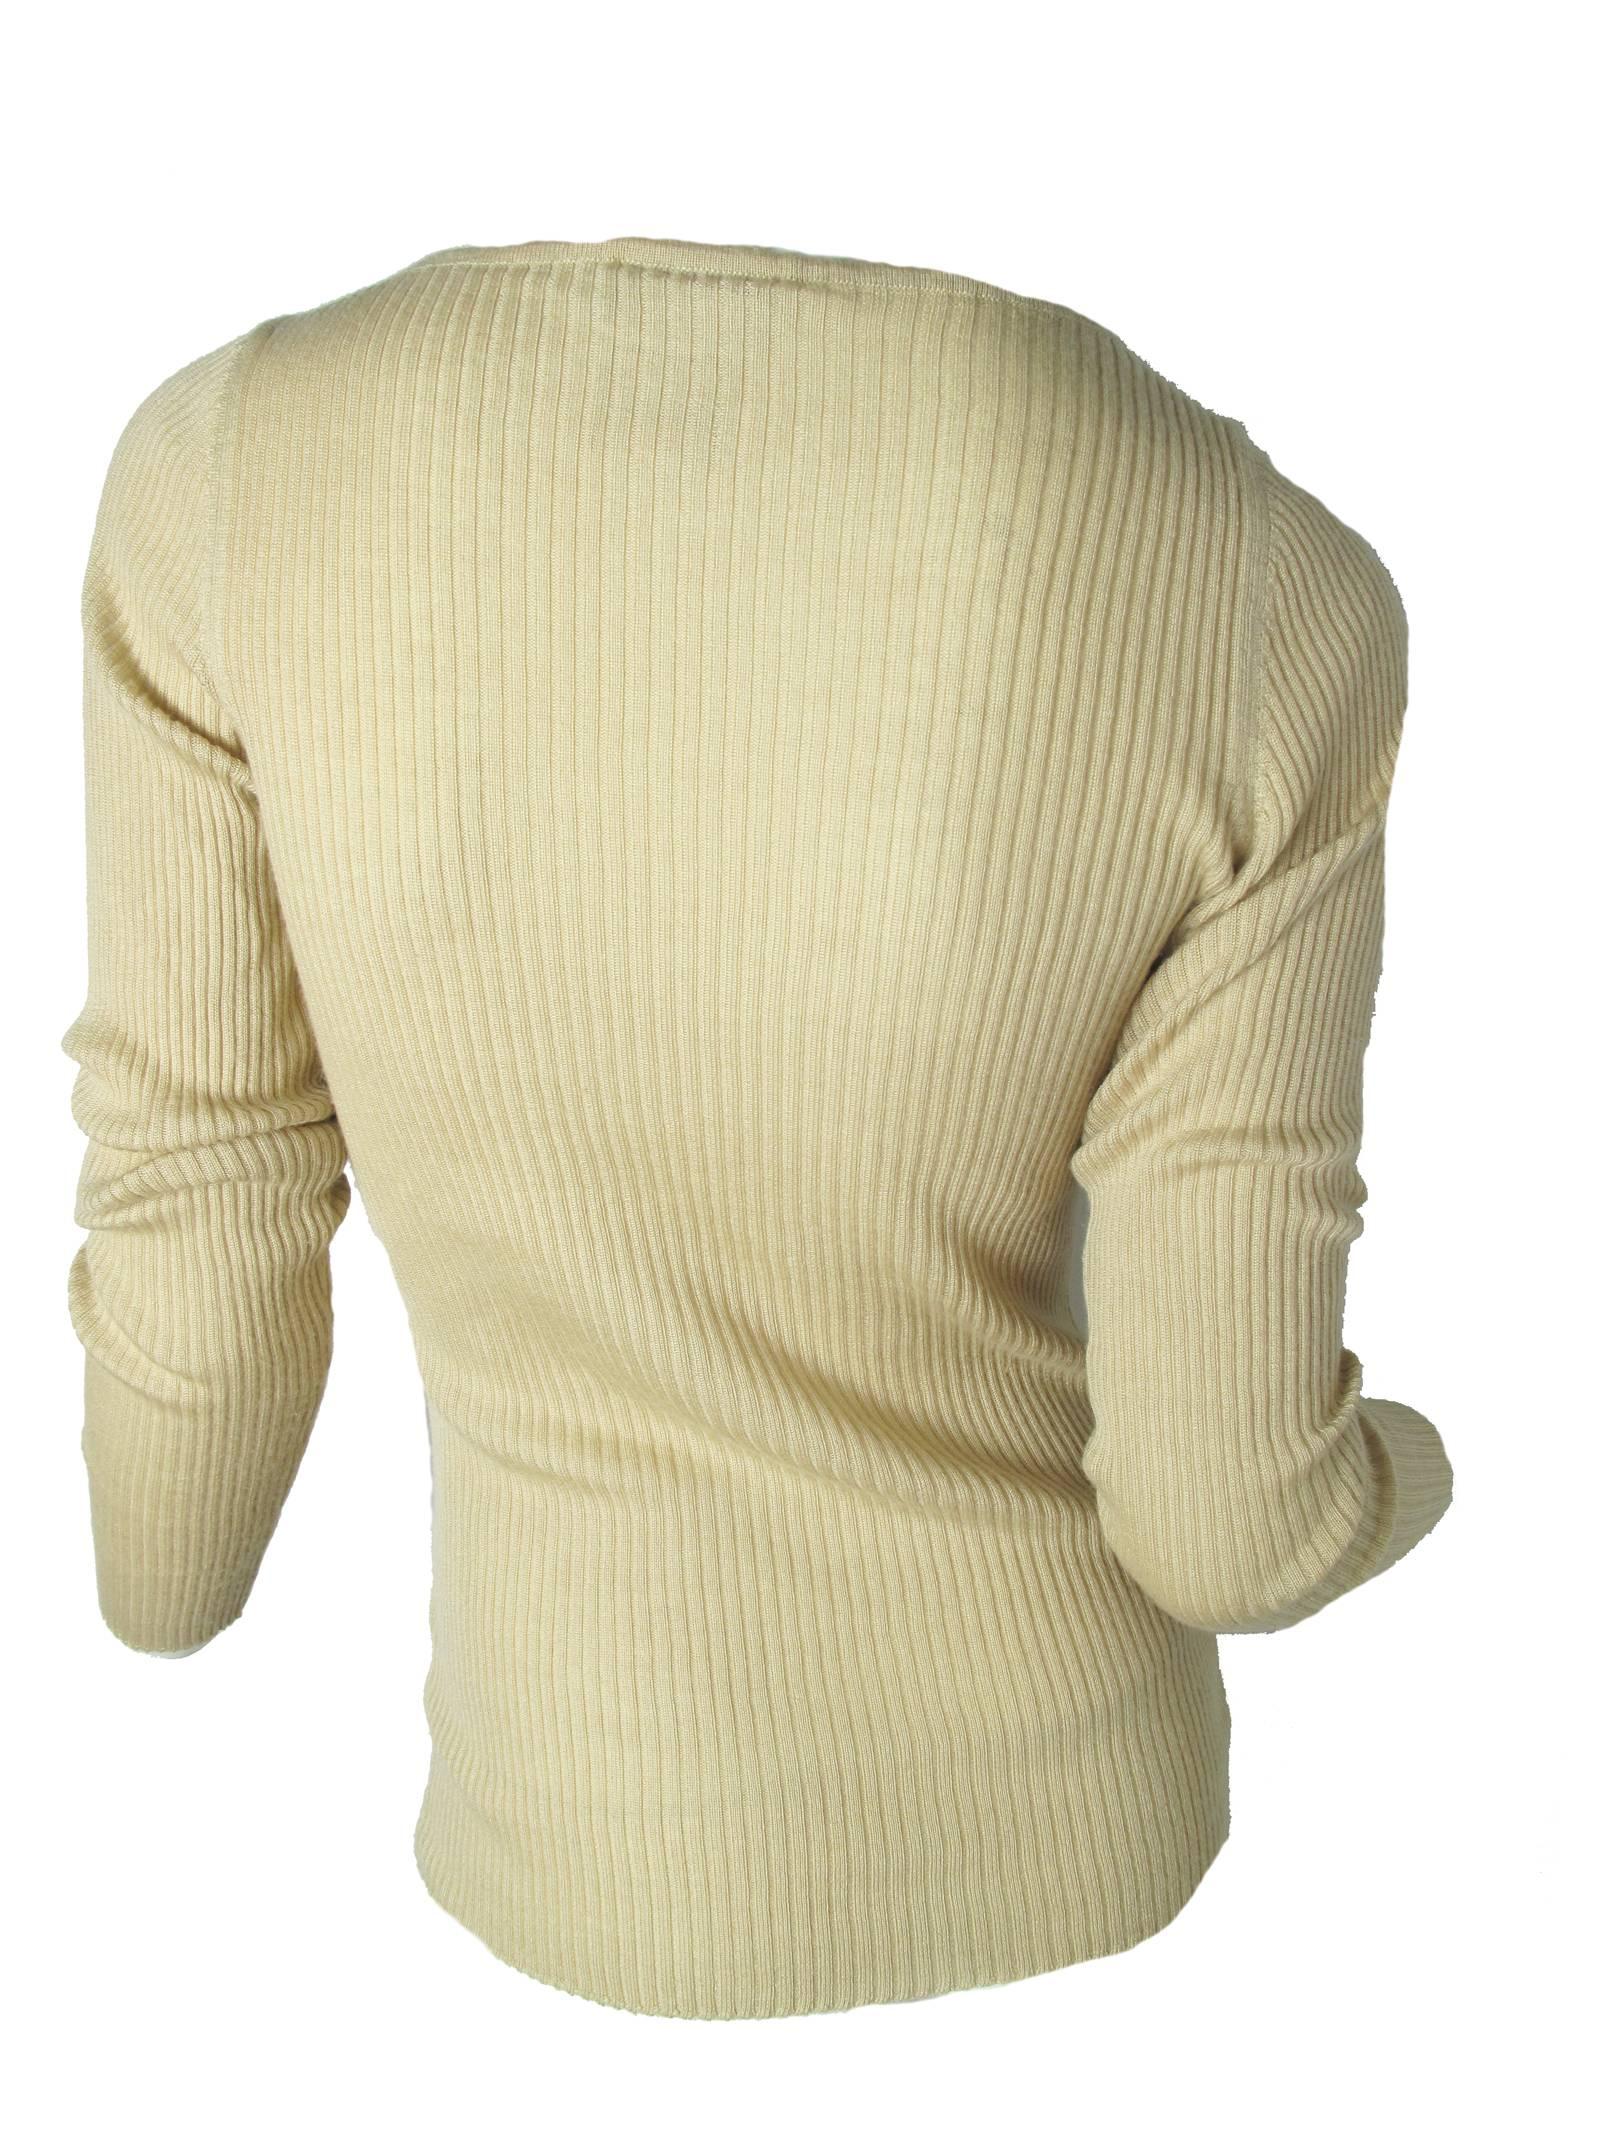 Chanel beige cashmere/silk ribbed sweater with boat neck. Circa 1999. Size 42

We accept returns for refund, please see our terms.  We offer free ground shipping within the US.  Please let us know if you have any questions. 